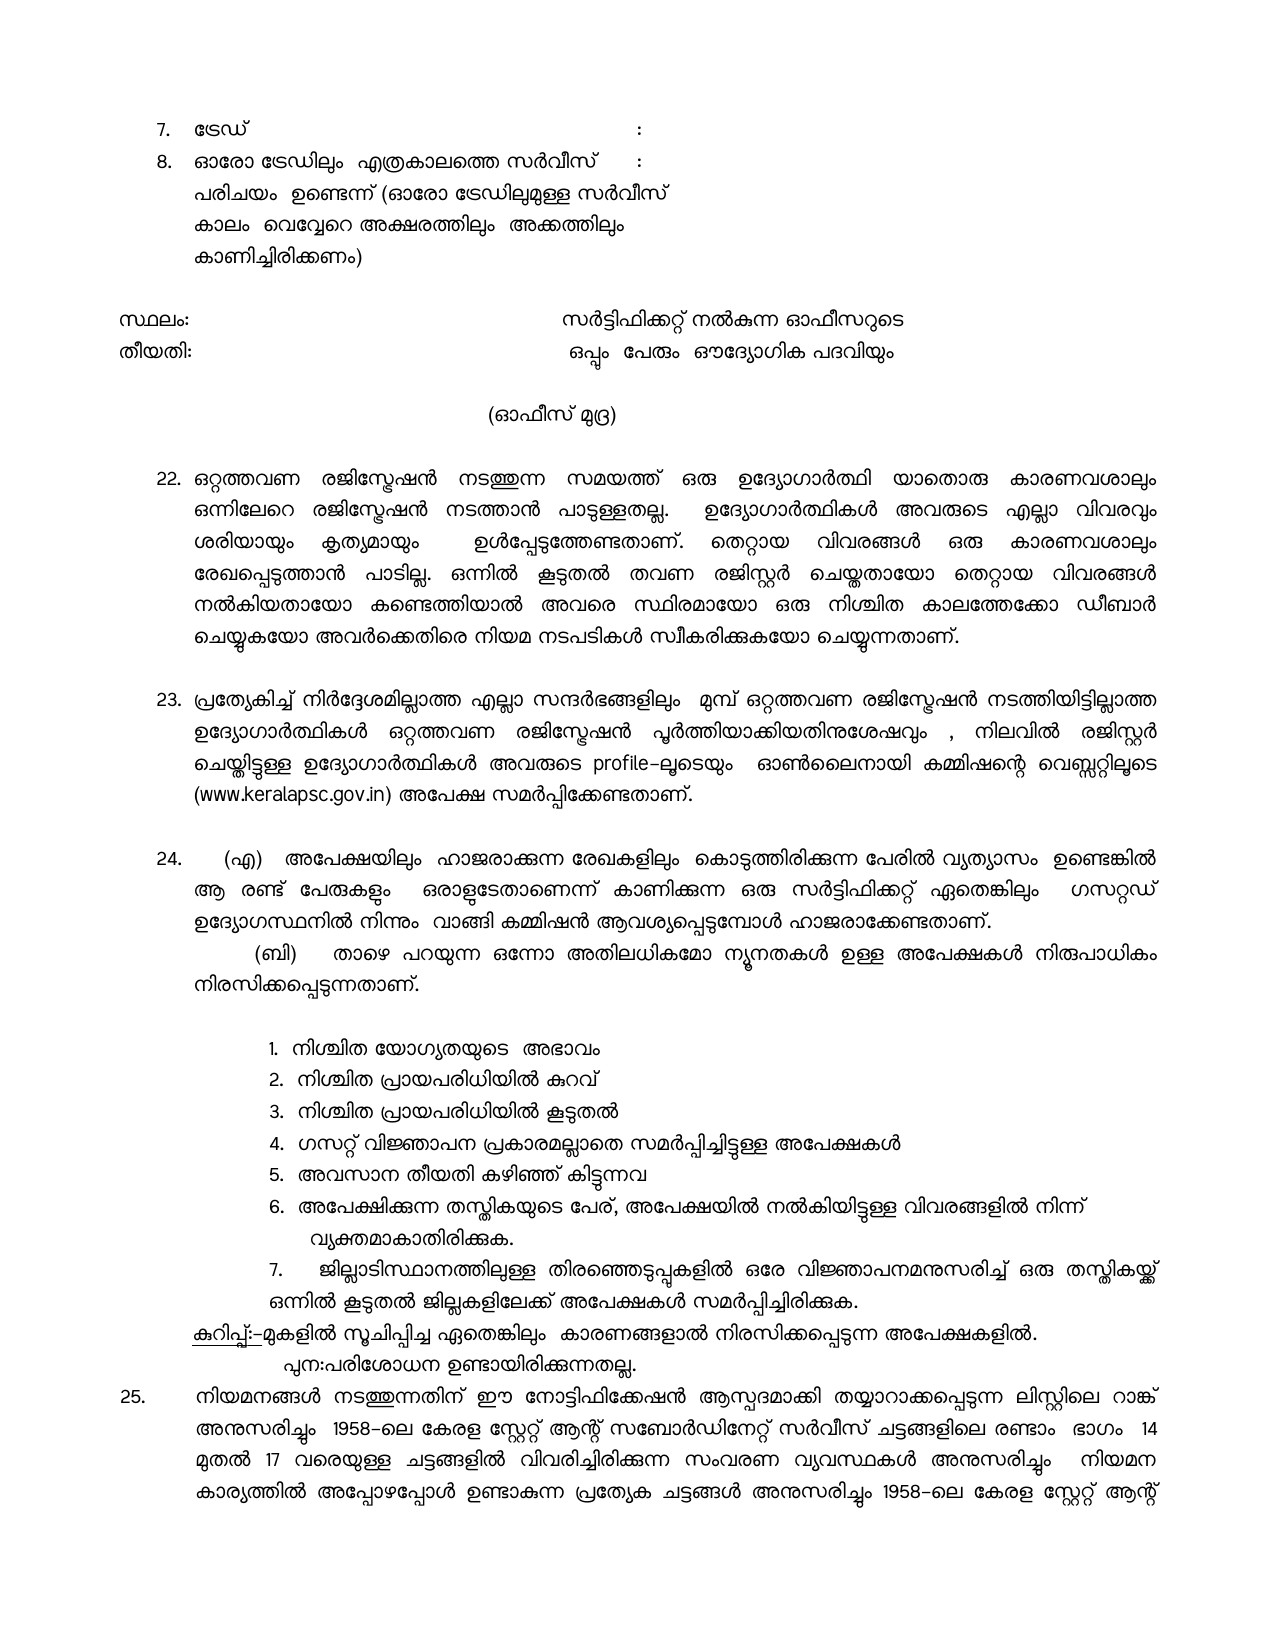 General Conditions and Certificate Formats in Malayalam - Notification Image 24